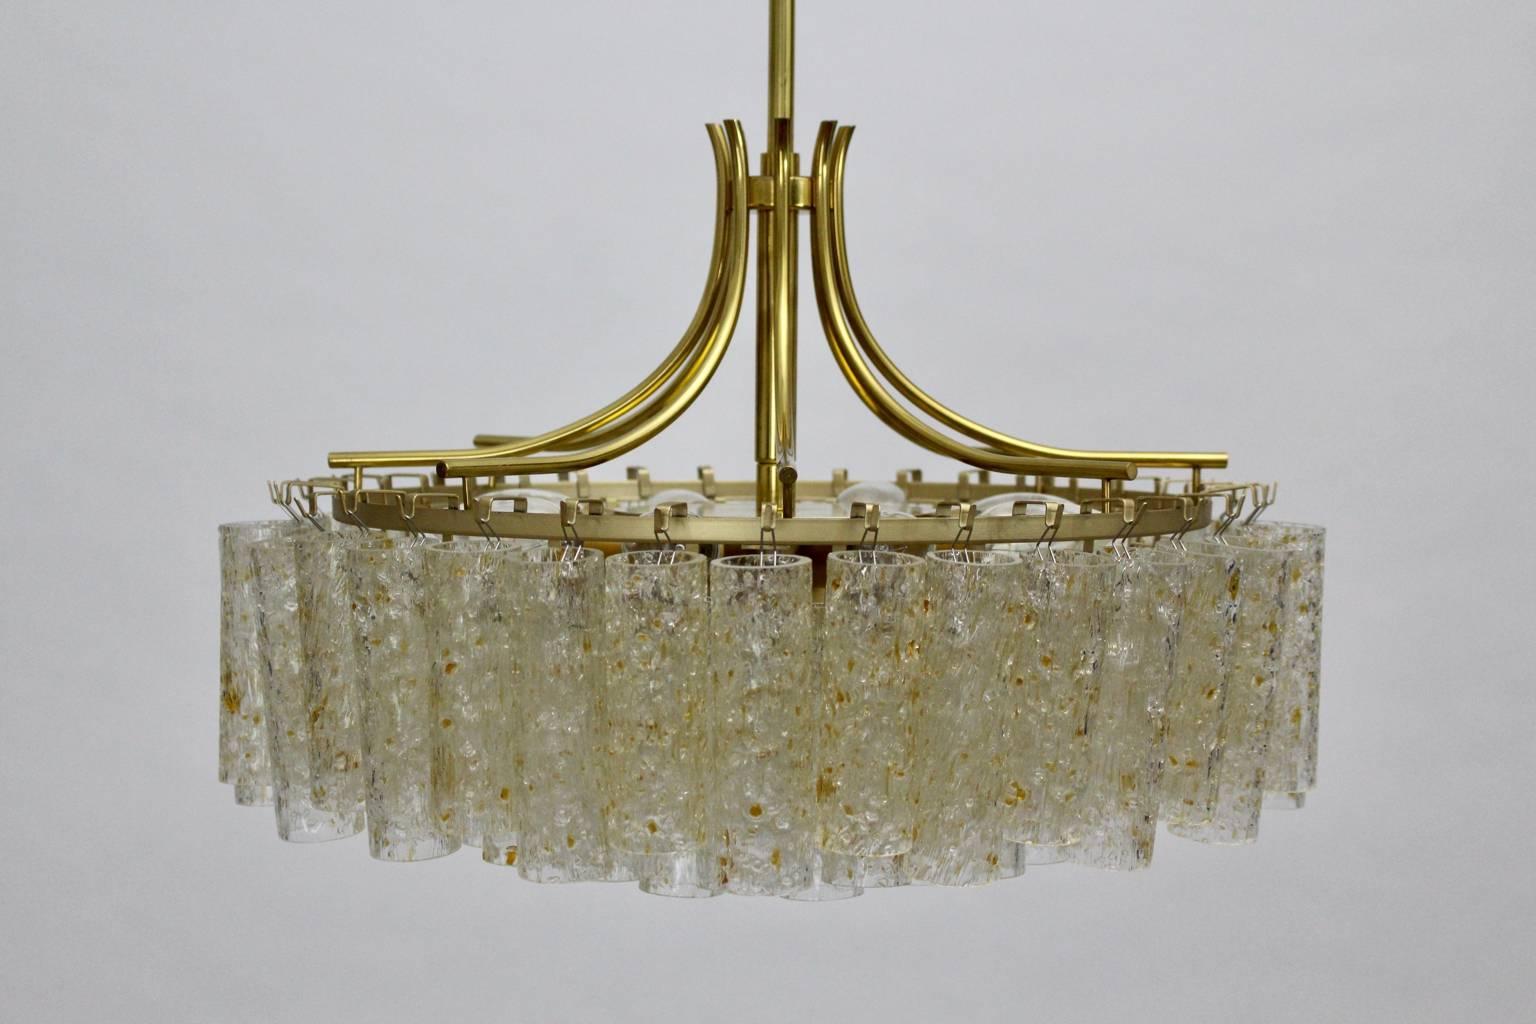 Mid Century Modern vintage chandelier from brass and textured glass rolls model 4479/8, which was executed by Doria Leuchten Germany, 1970s.
The chandelier has 4 tiers with 77 textured glass tubes and it lights with 9 sockets E 14.
The stem was made